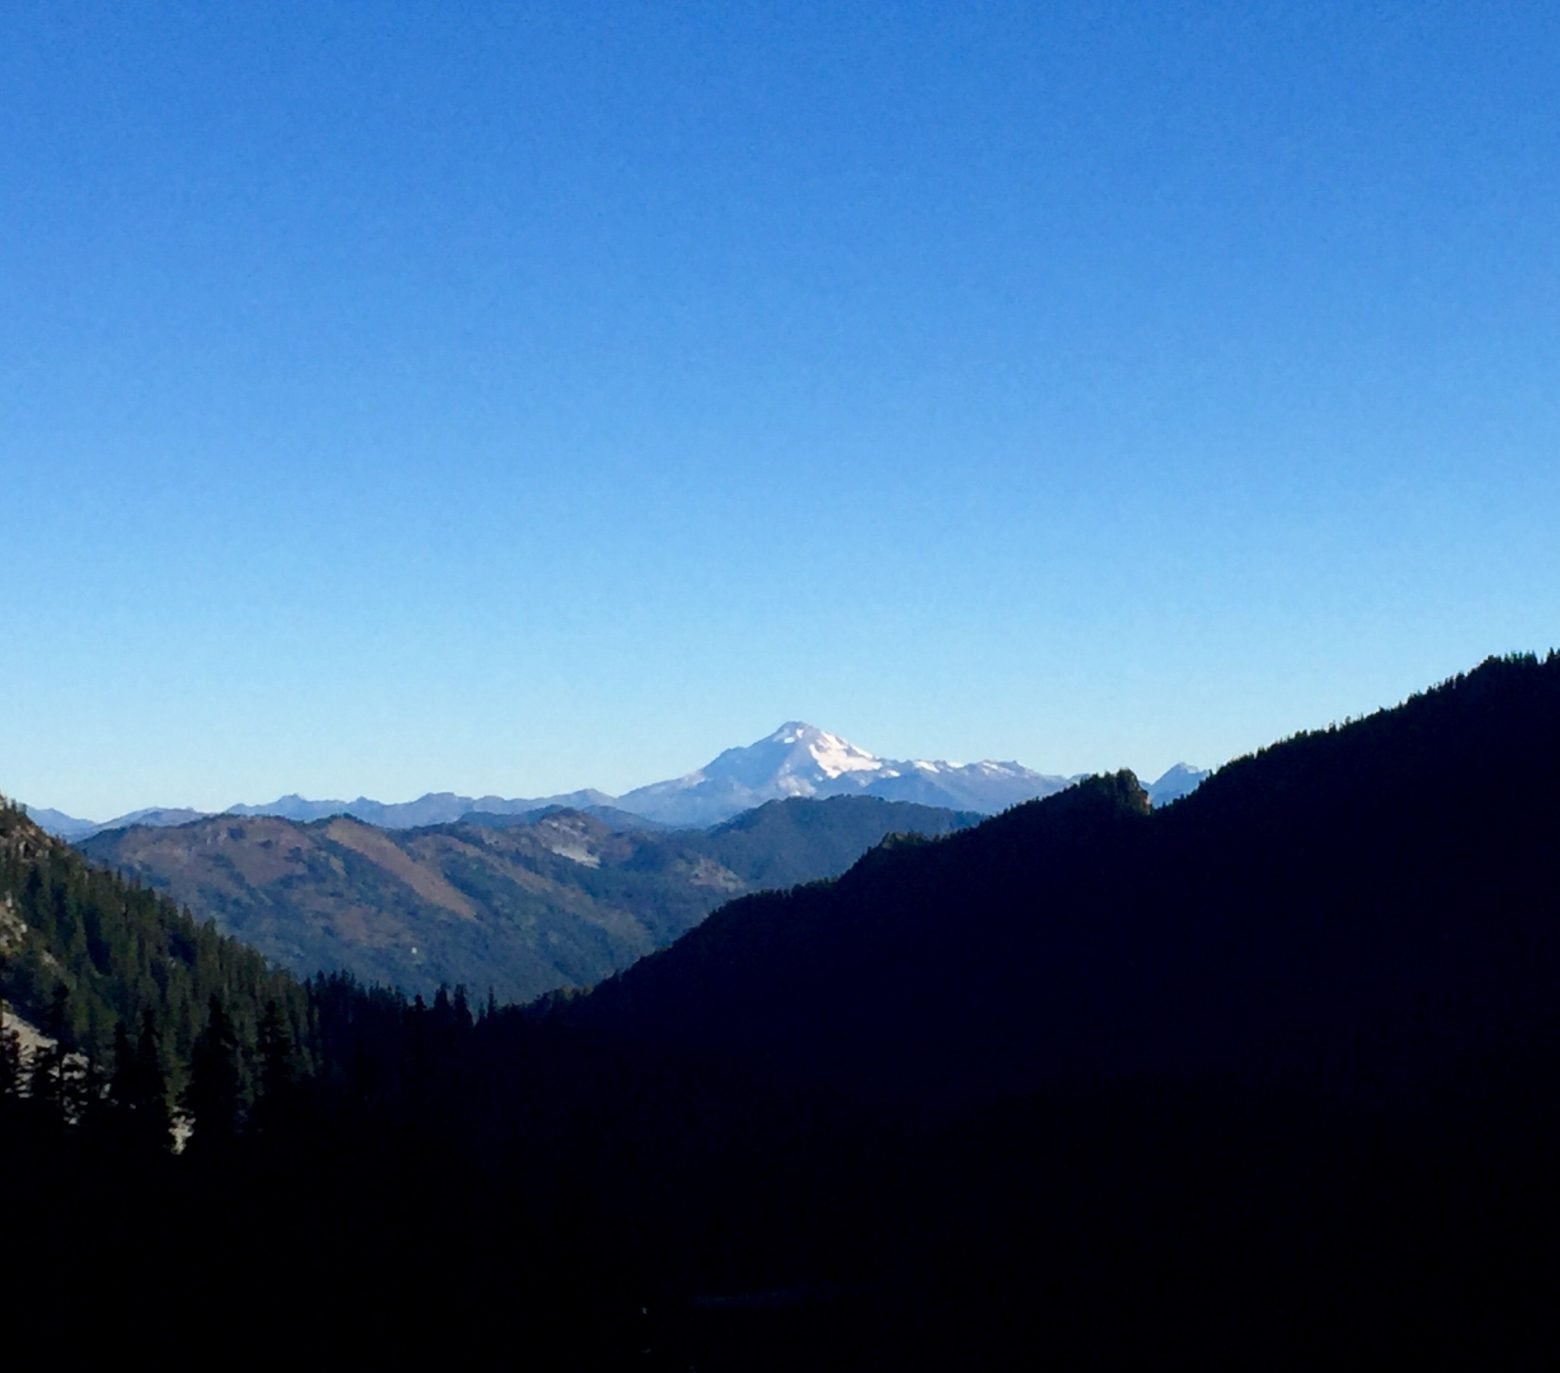 Morning view of Glacier Peak on the Pacific Crest Trail